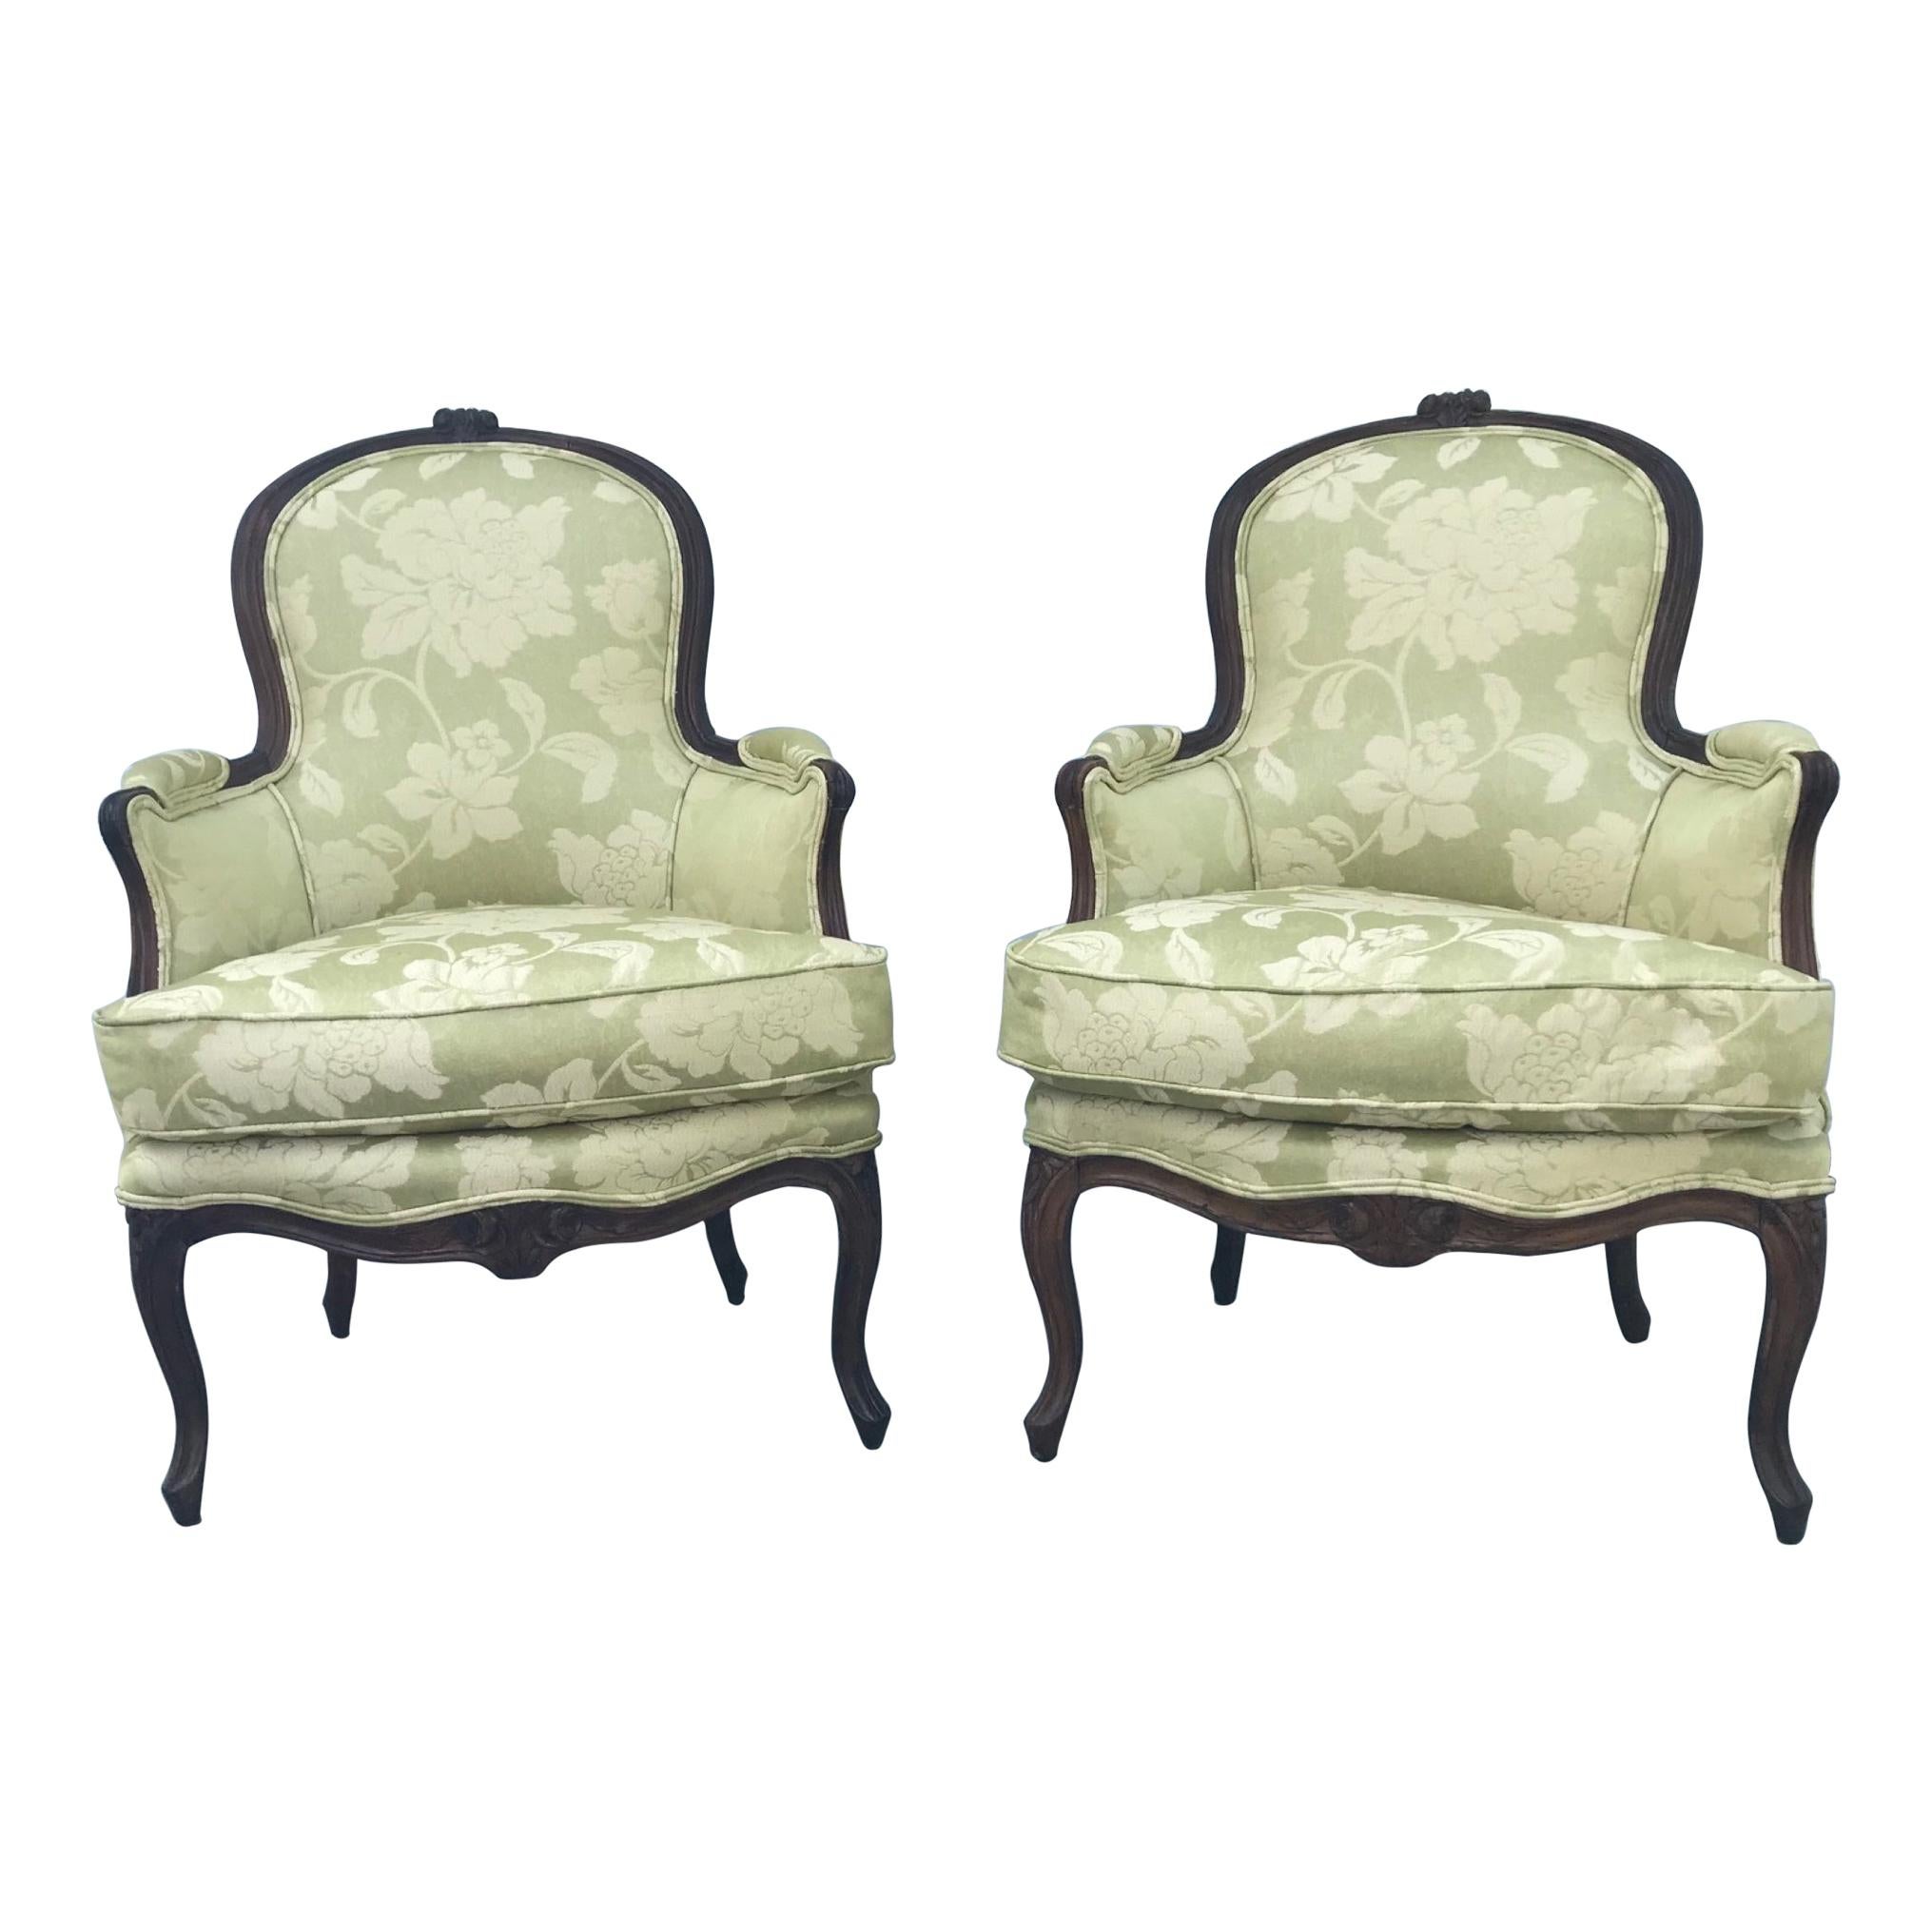 Pair of Period French Louis XV Carved Bergeres Cabriolet, Paris, circa 1760